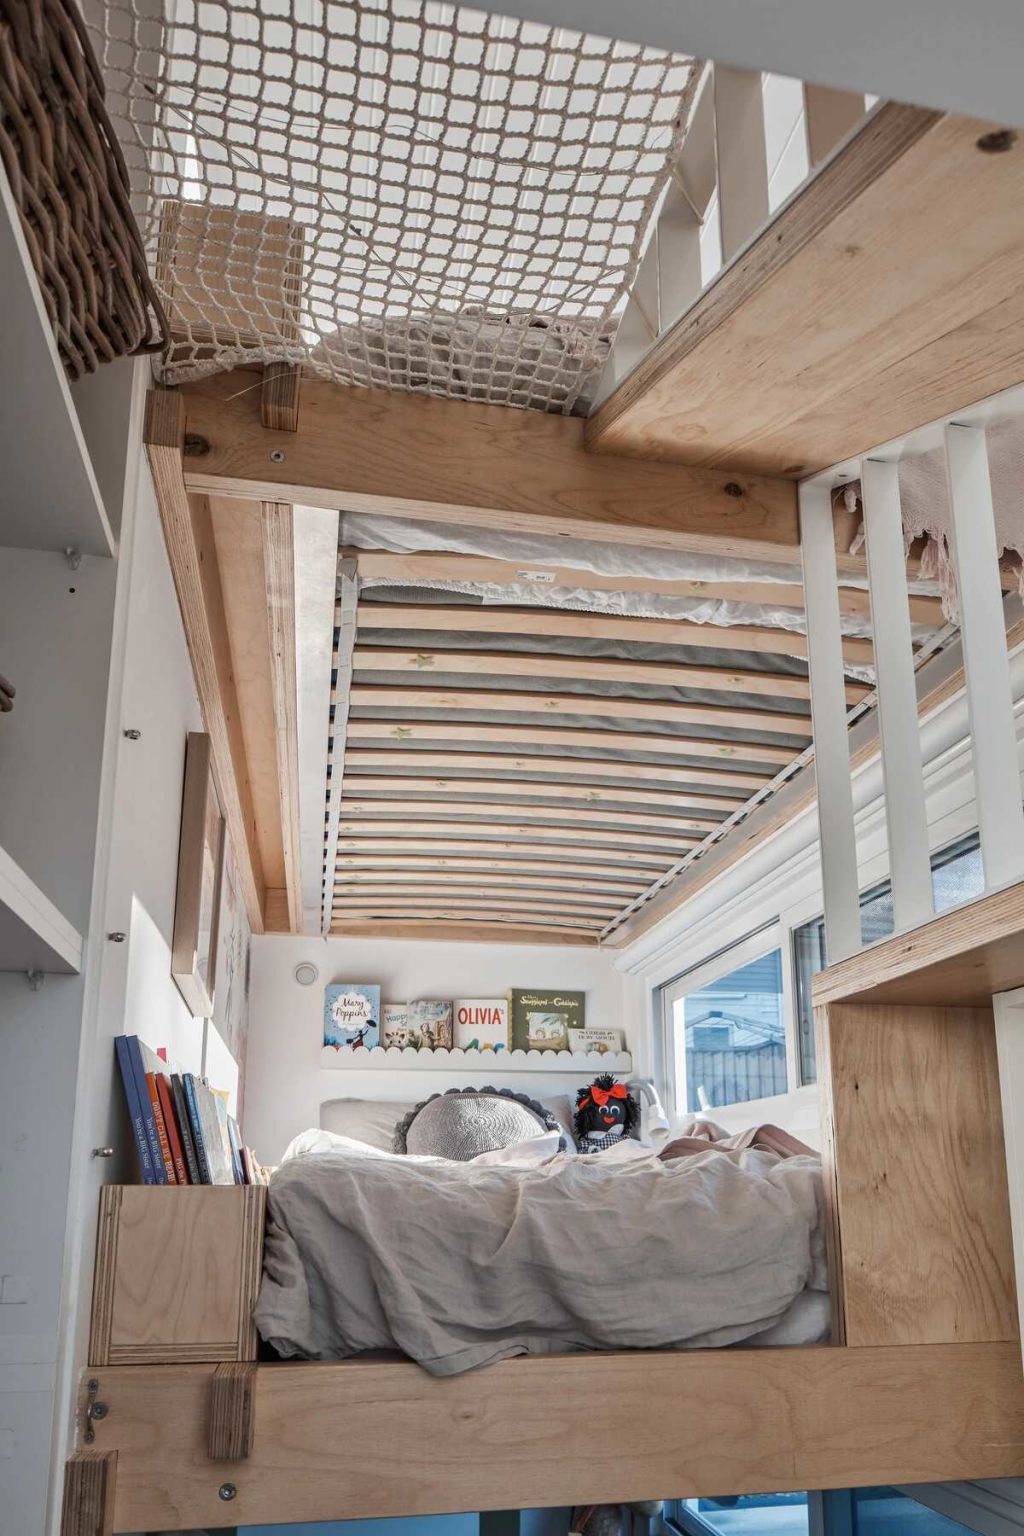 The bunk beds sit one above the other. Photo: Andy MacPherson